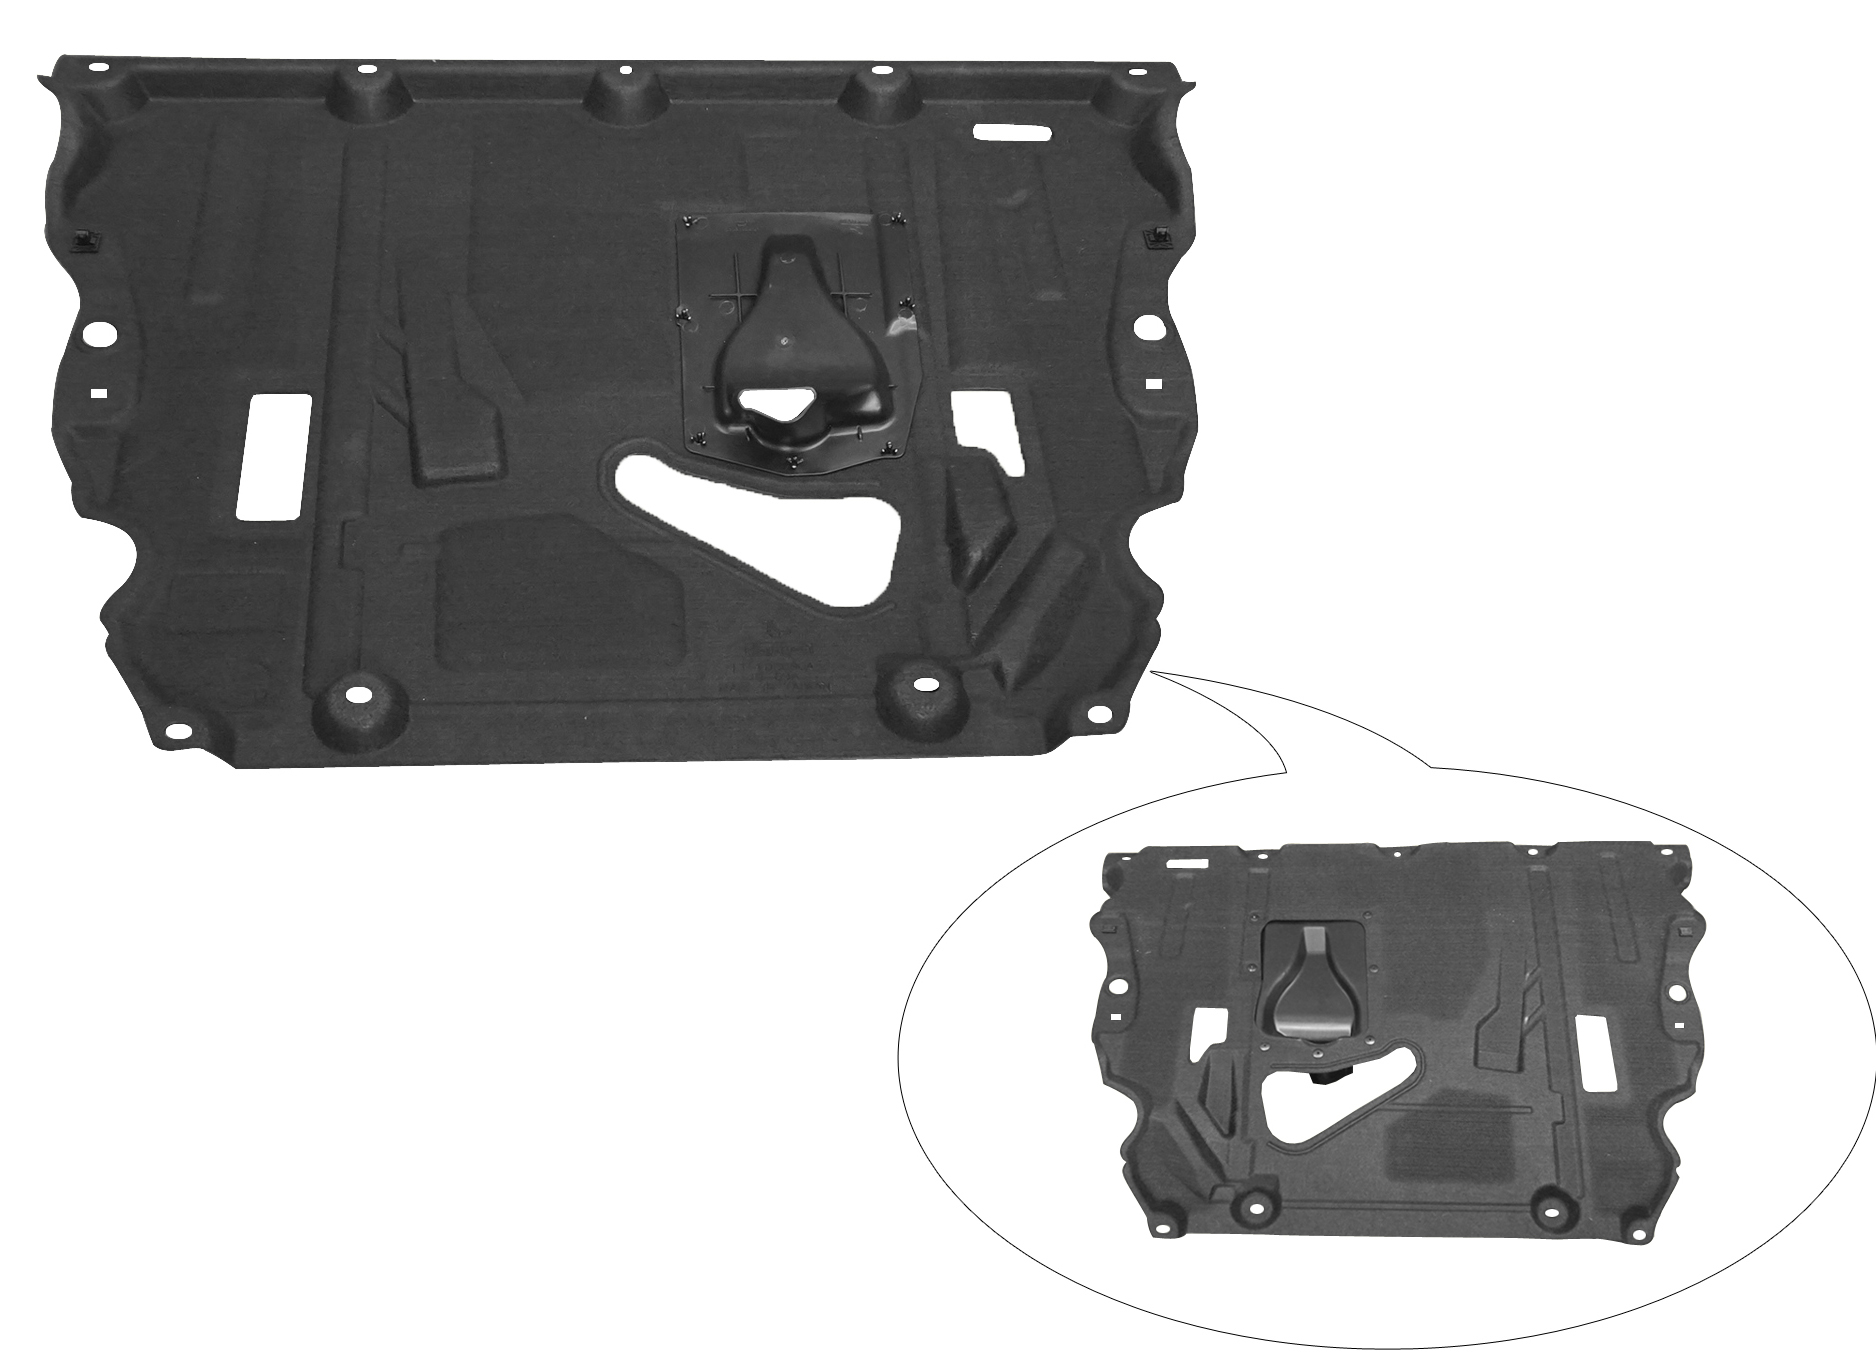 Aftermarket UNDER ENGINE COVERS for FORD - EDGE, EDGE,15-18,Lower engine cover